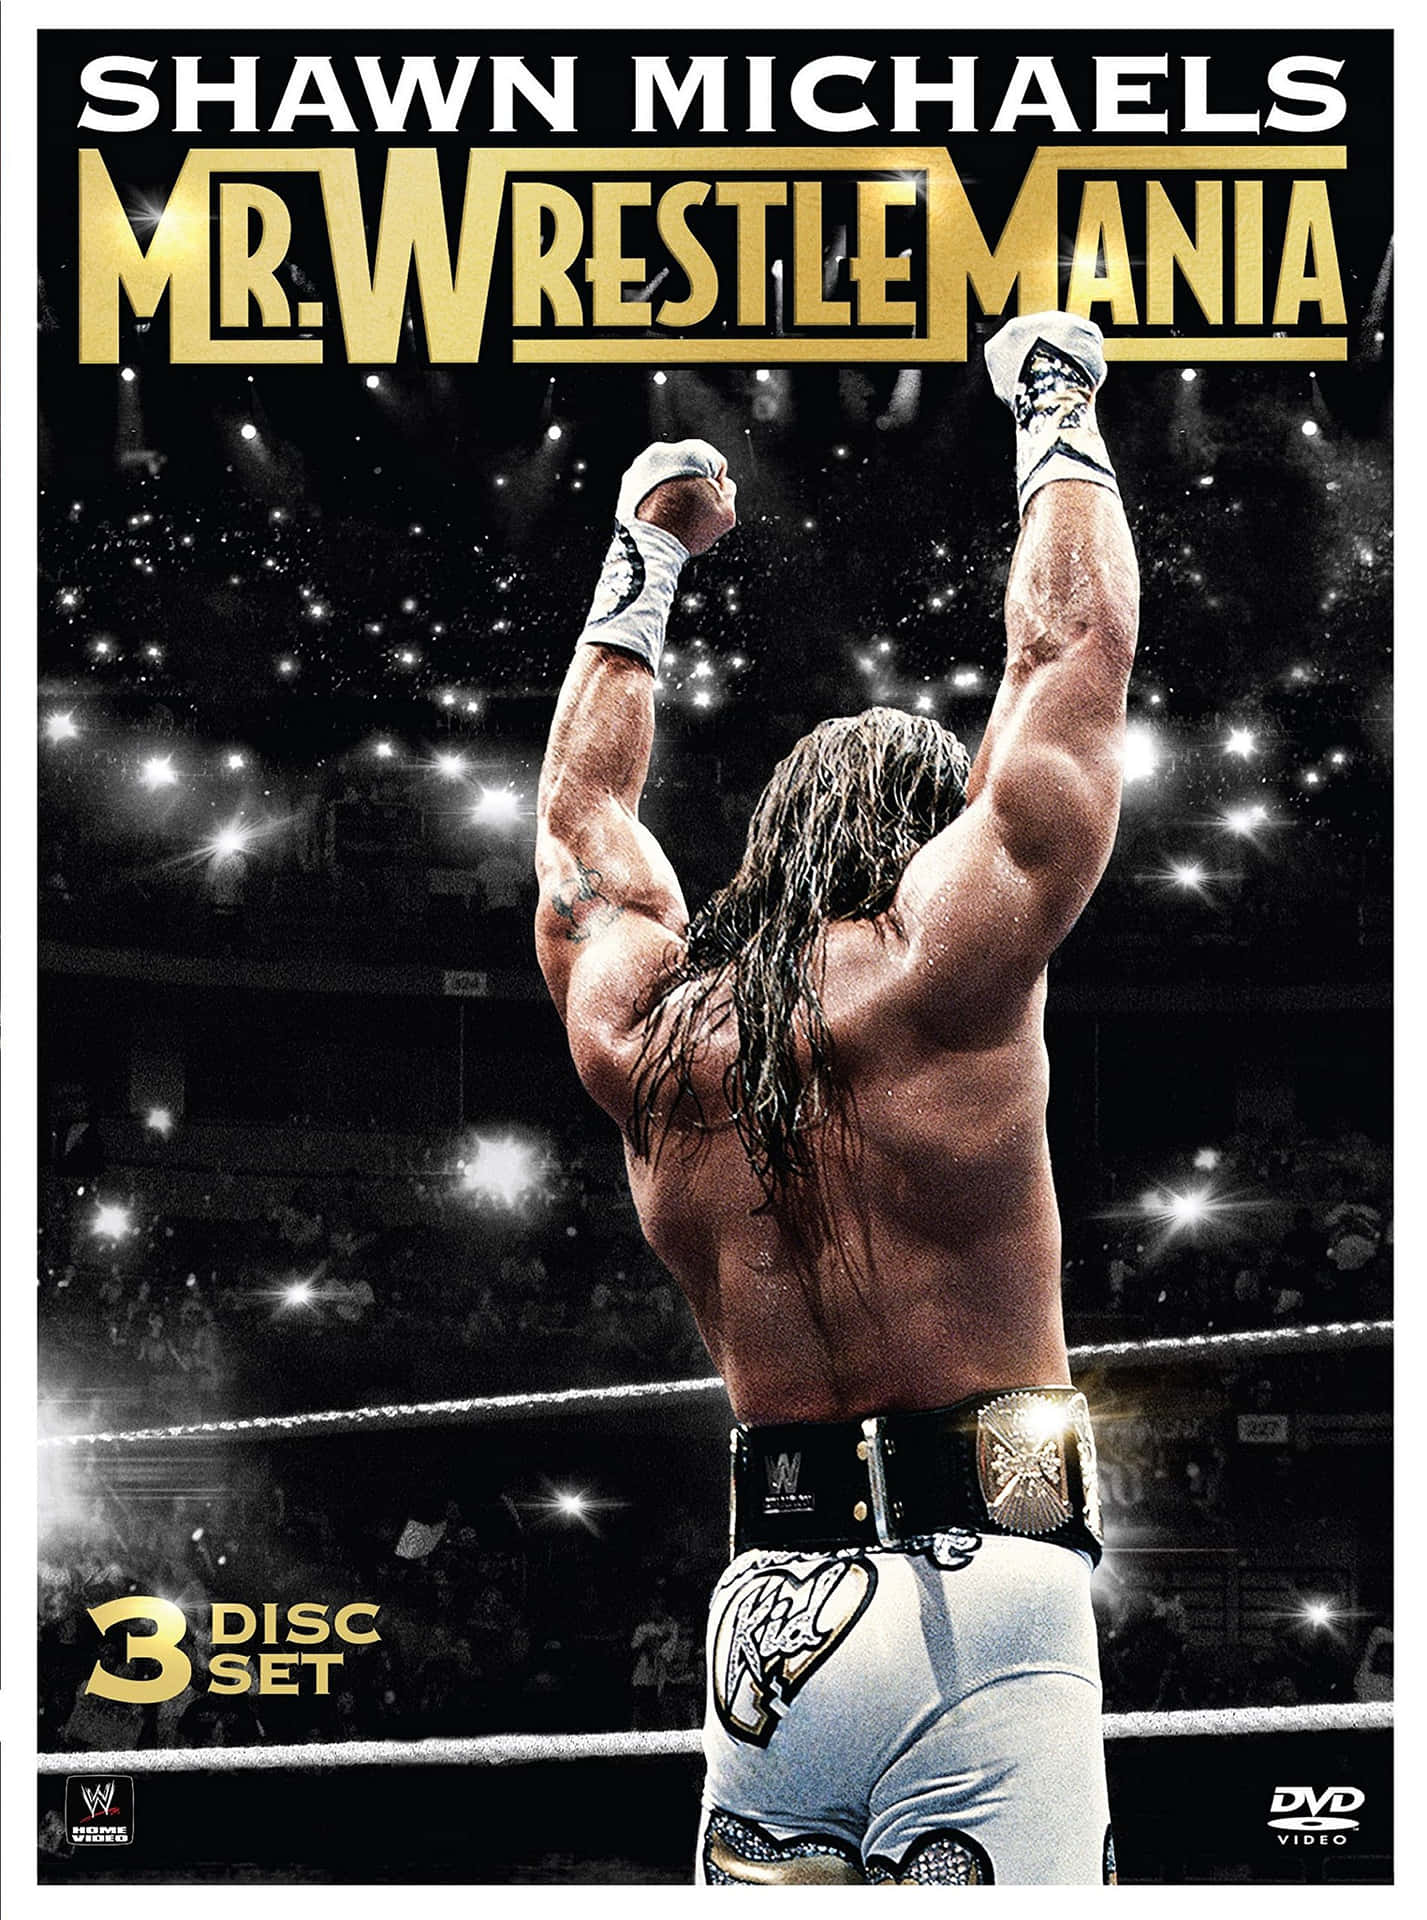 Shawn Michaels Dvd Cover Background